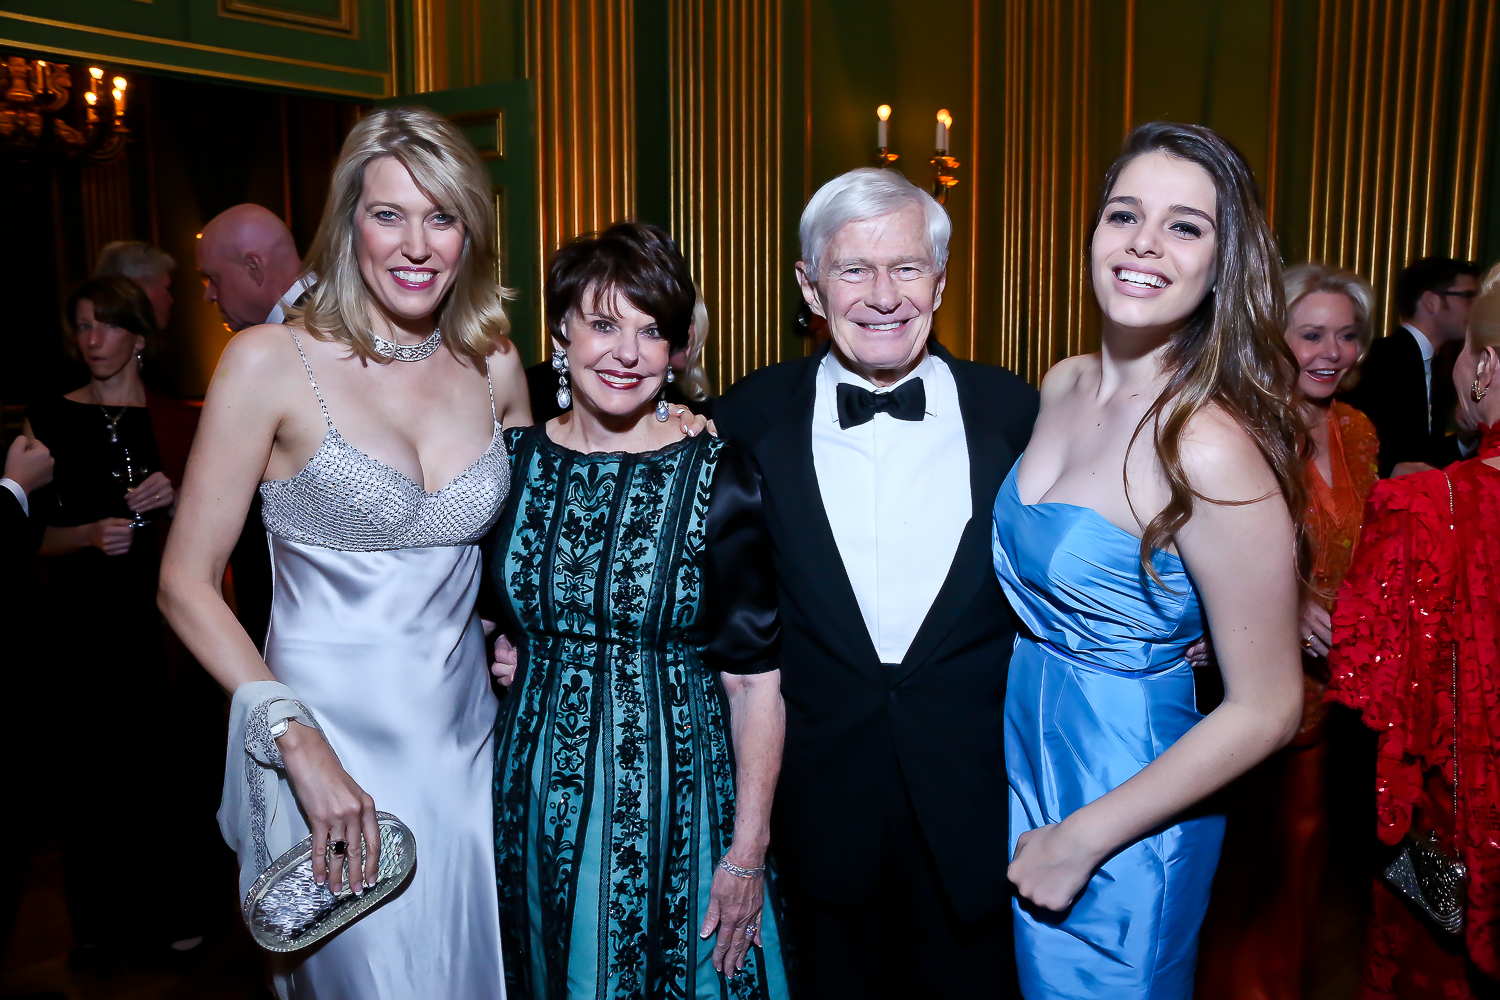 A Deep Breath In at the Annual LUNGevity Gala